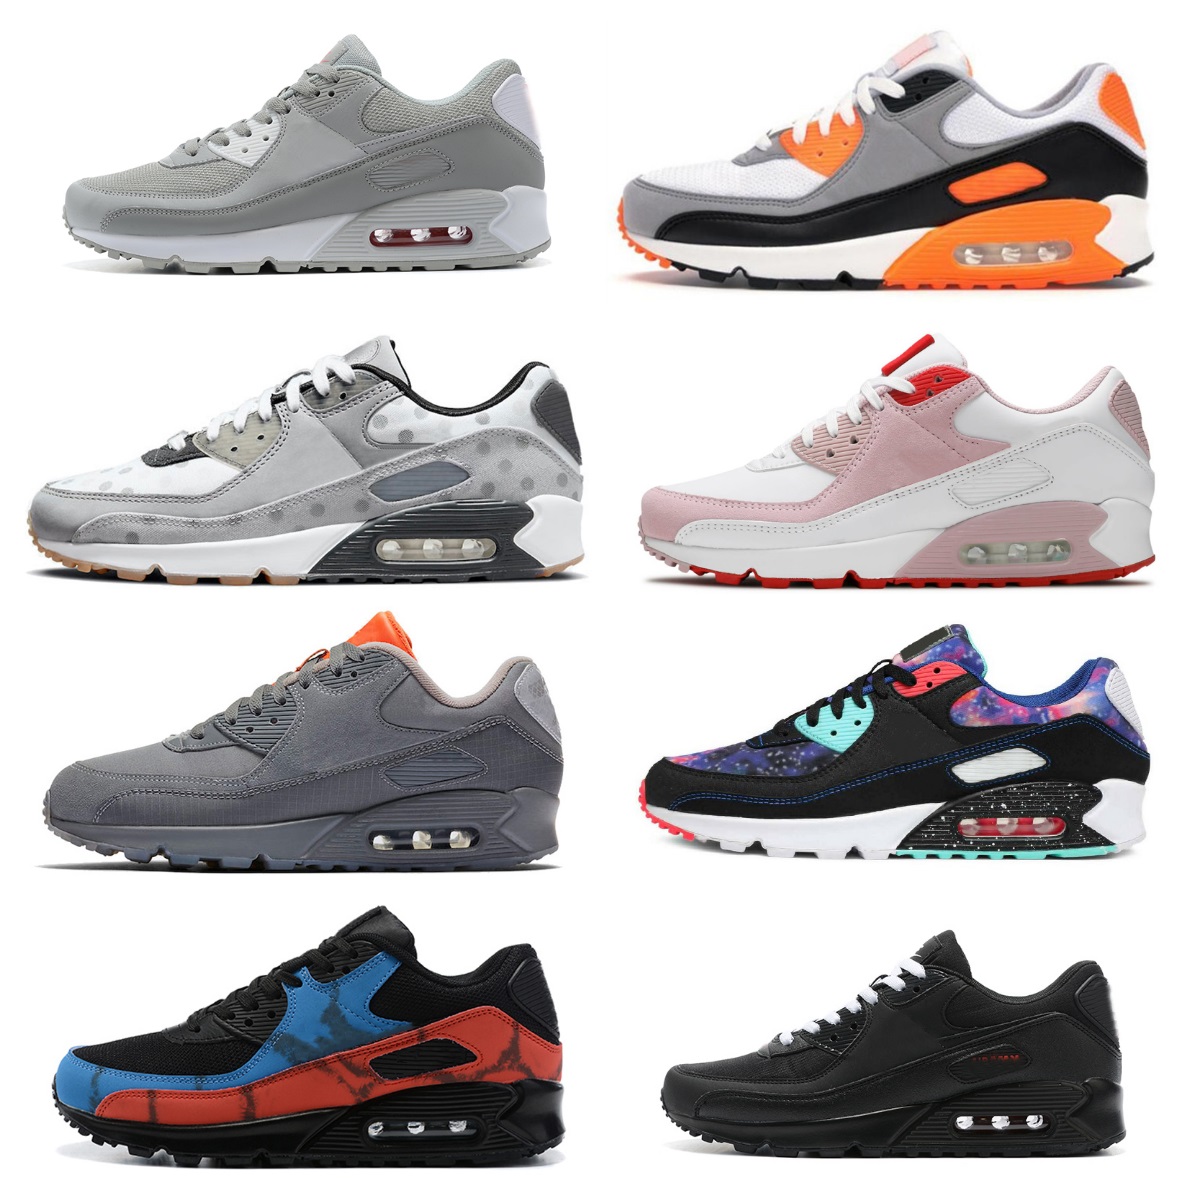 

Shoes Running Og 90 Airmaxs Triple Black White Rose Pink Hyper Turquoise Orange Camo Viotech Be True Laser Blue City Pack London 90s Airs Womens Sneakers, Ss29